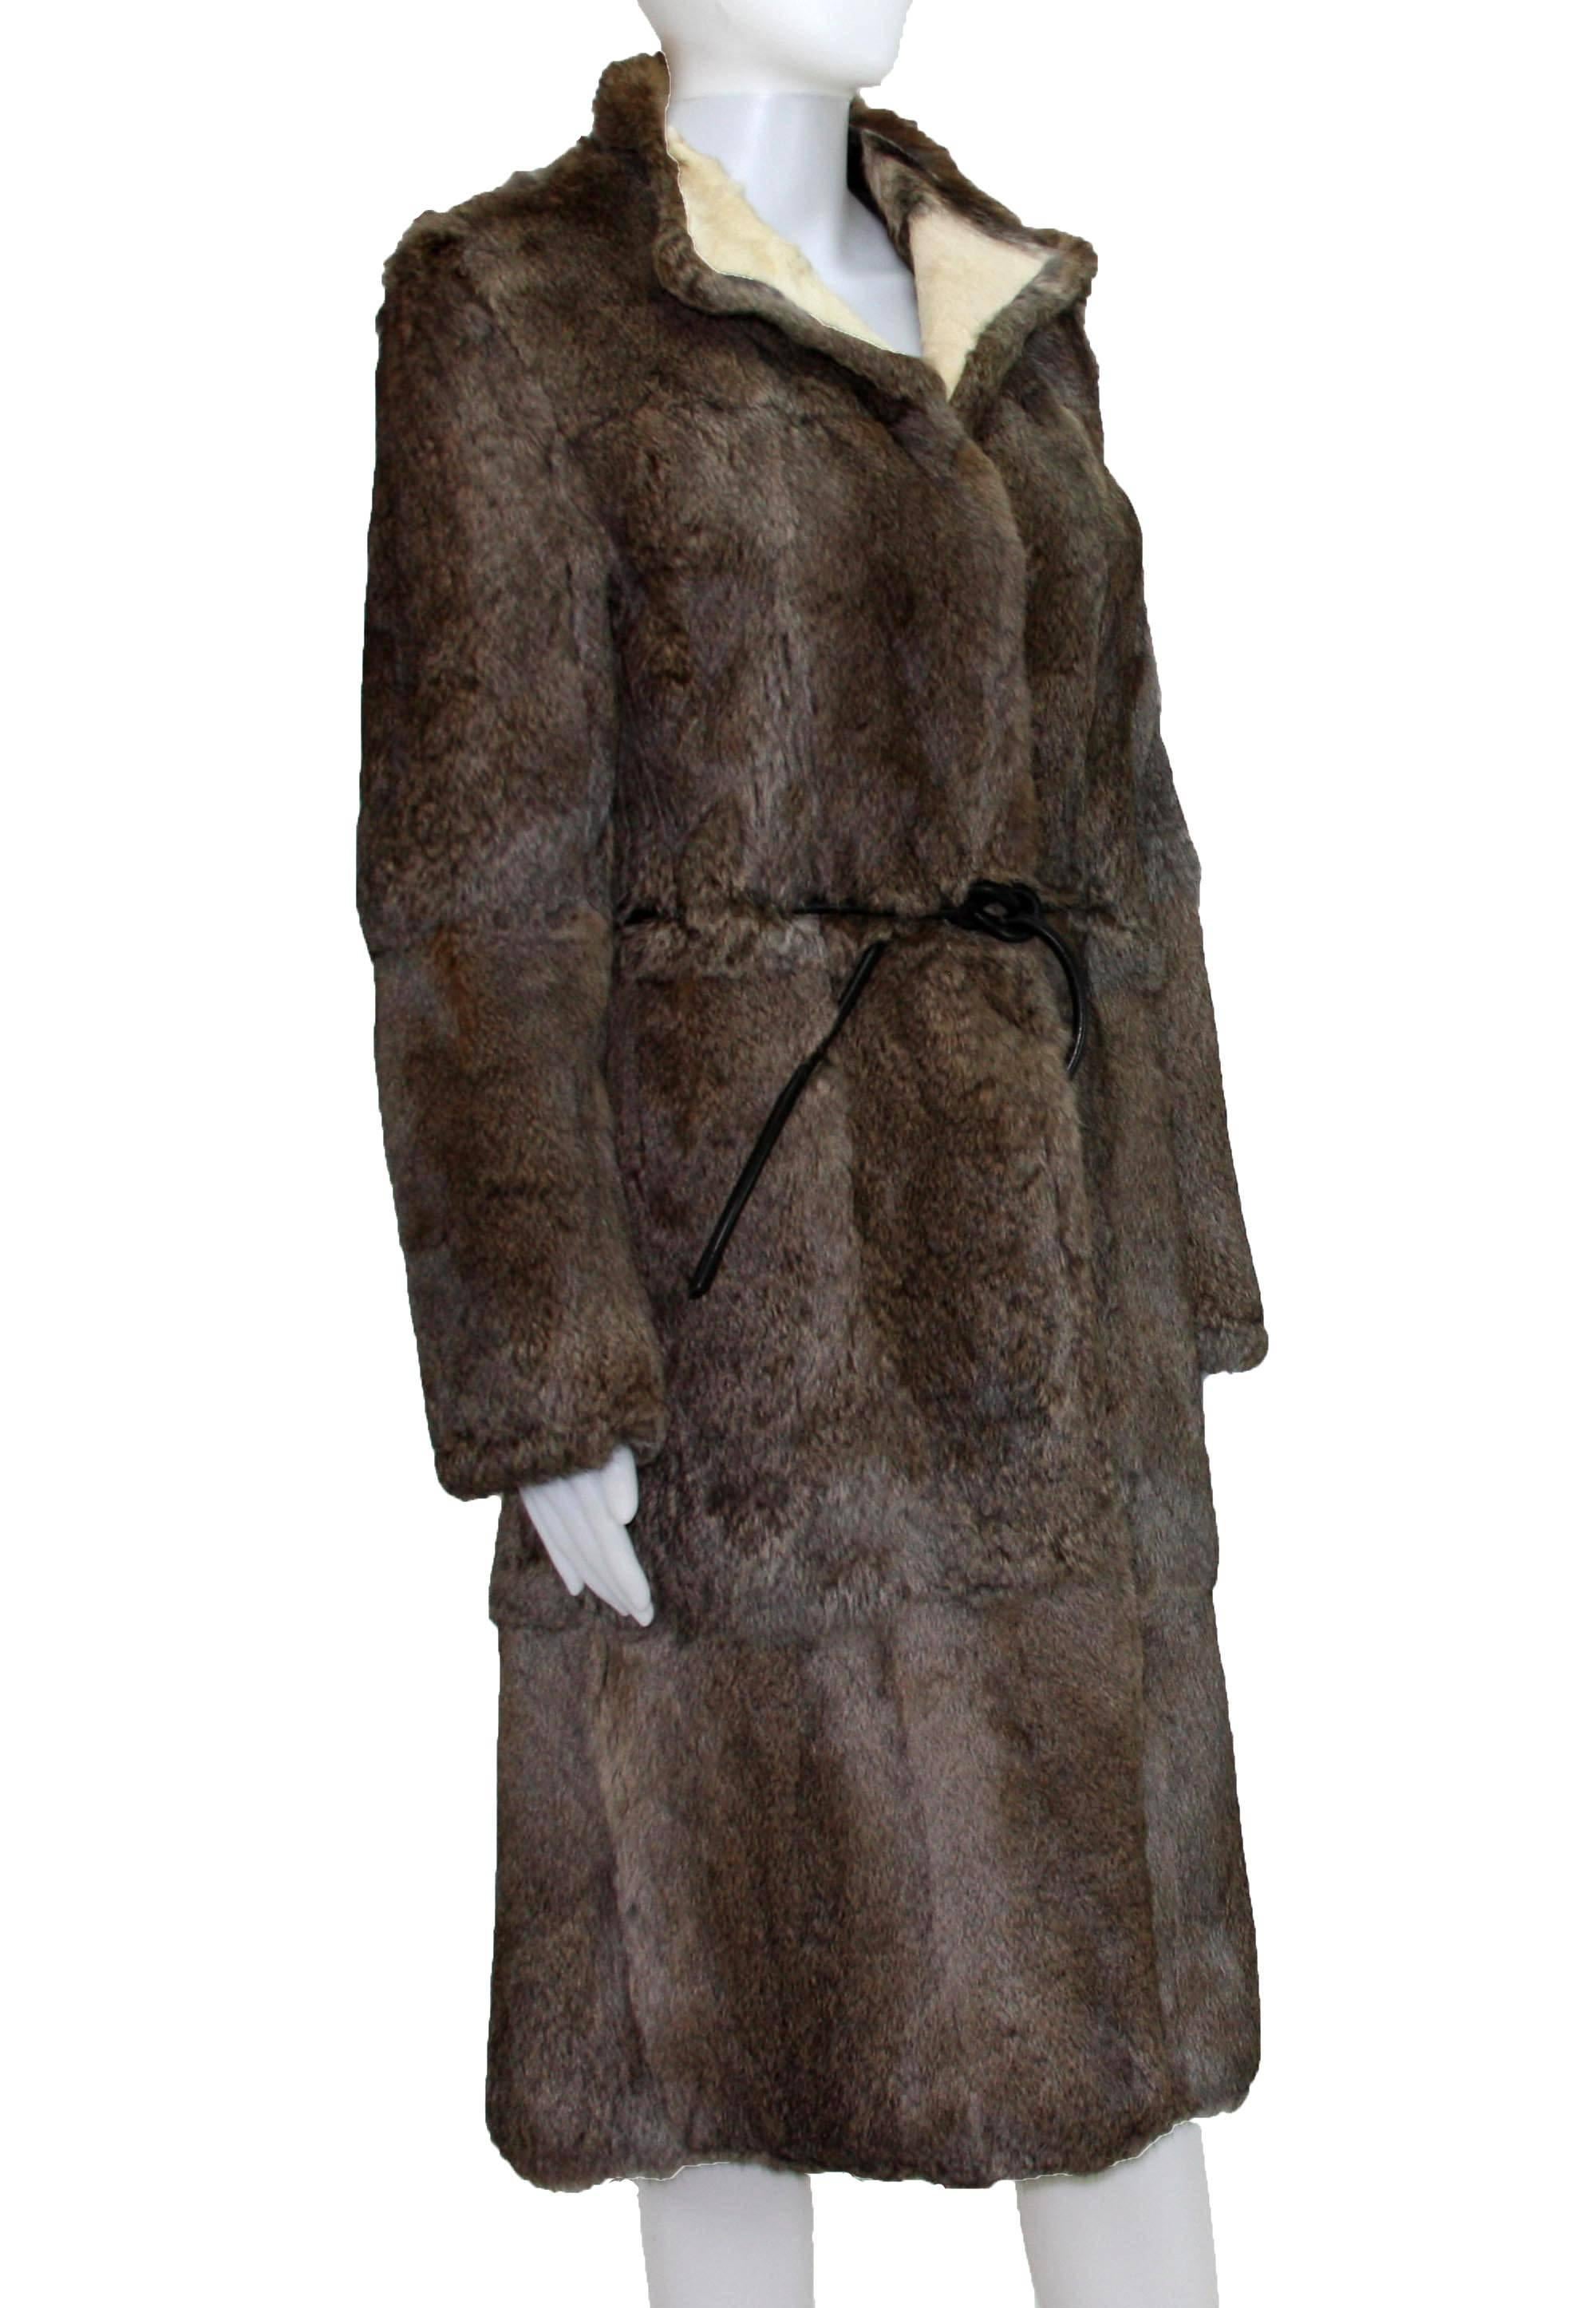 New Tom Ford for Gucci 1999 Collection Reversible Beige Fur Coat It.44 2